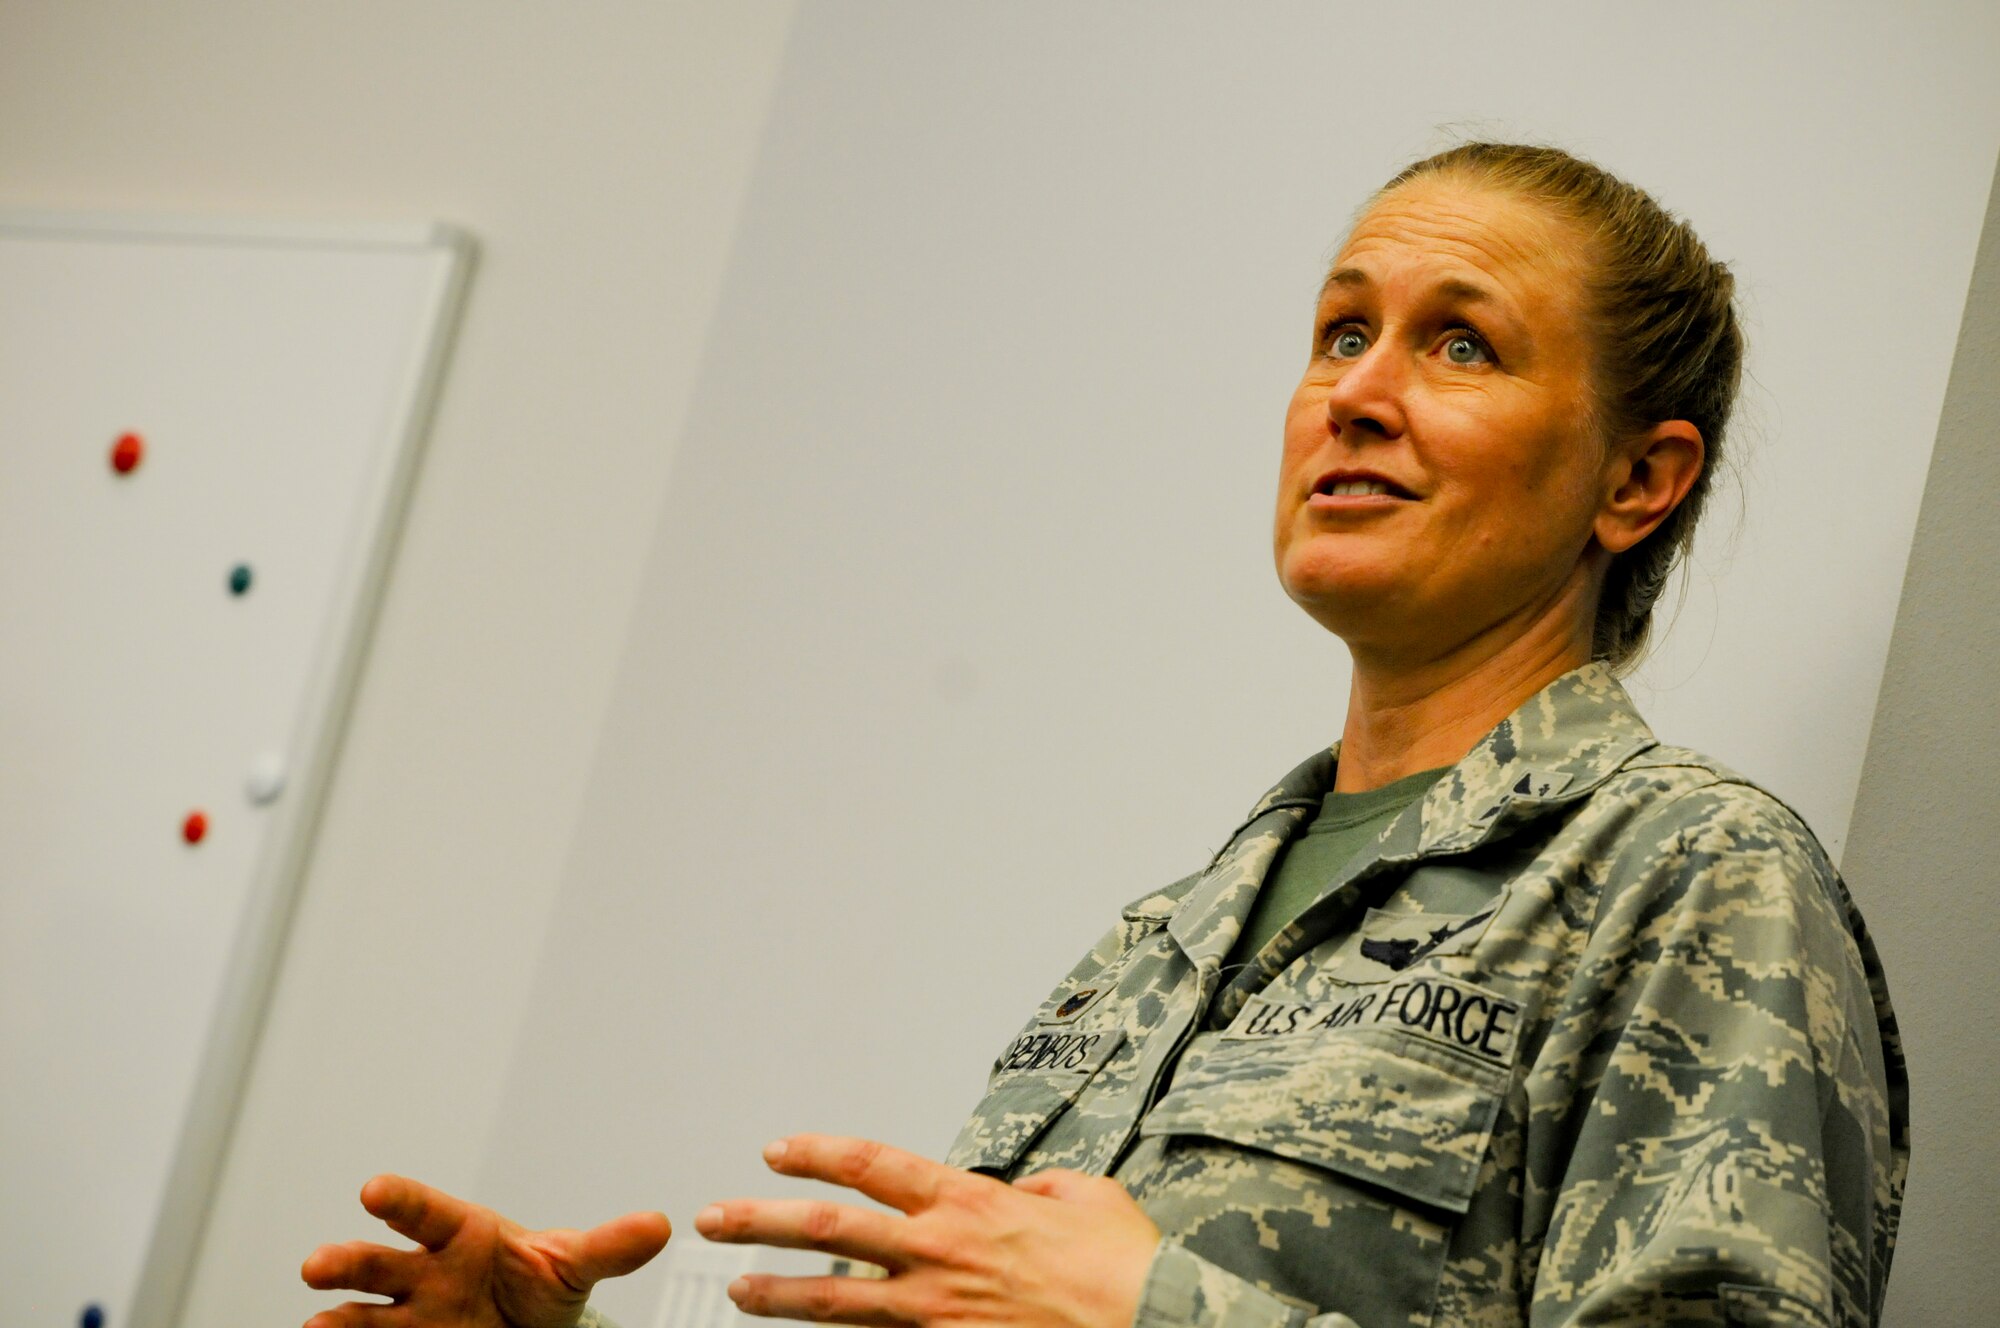 Col. Bobbi Doorenbos, commander of the 188th Wing, speaks to Airmen during a newcomers orientation class held Aug. 1, 2015 at Ebbing Air National Guard Base, Ark. Doorenbos showed Brig. Gen Kurt Vogel, commander of the Arkansas Air National Guard, the unique capabilities of the 188th Wing during a two-day tour. (U.S. Air National Guard photo by Capt. Holli Nelson/Released)